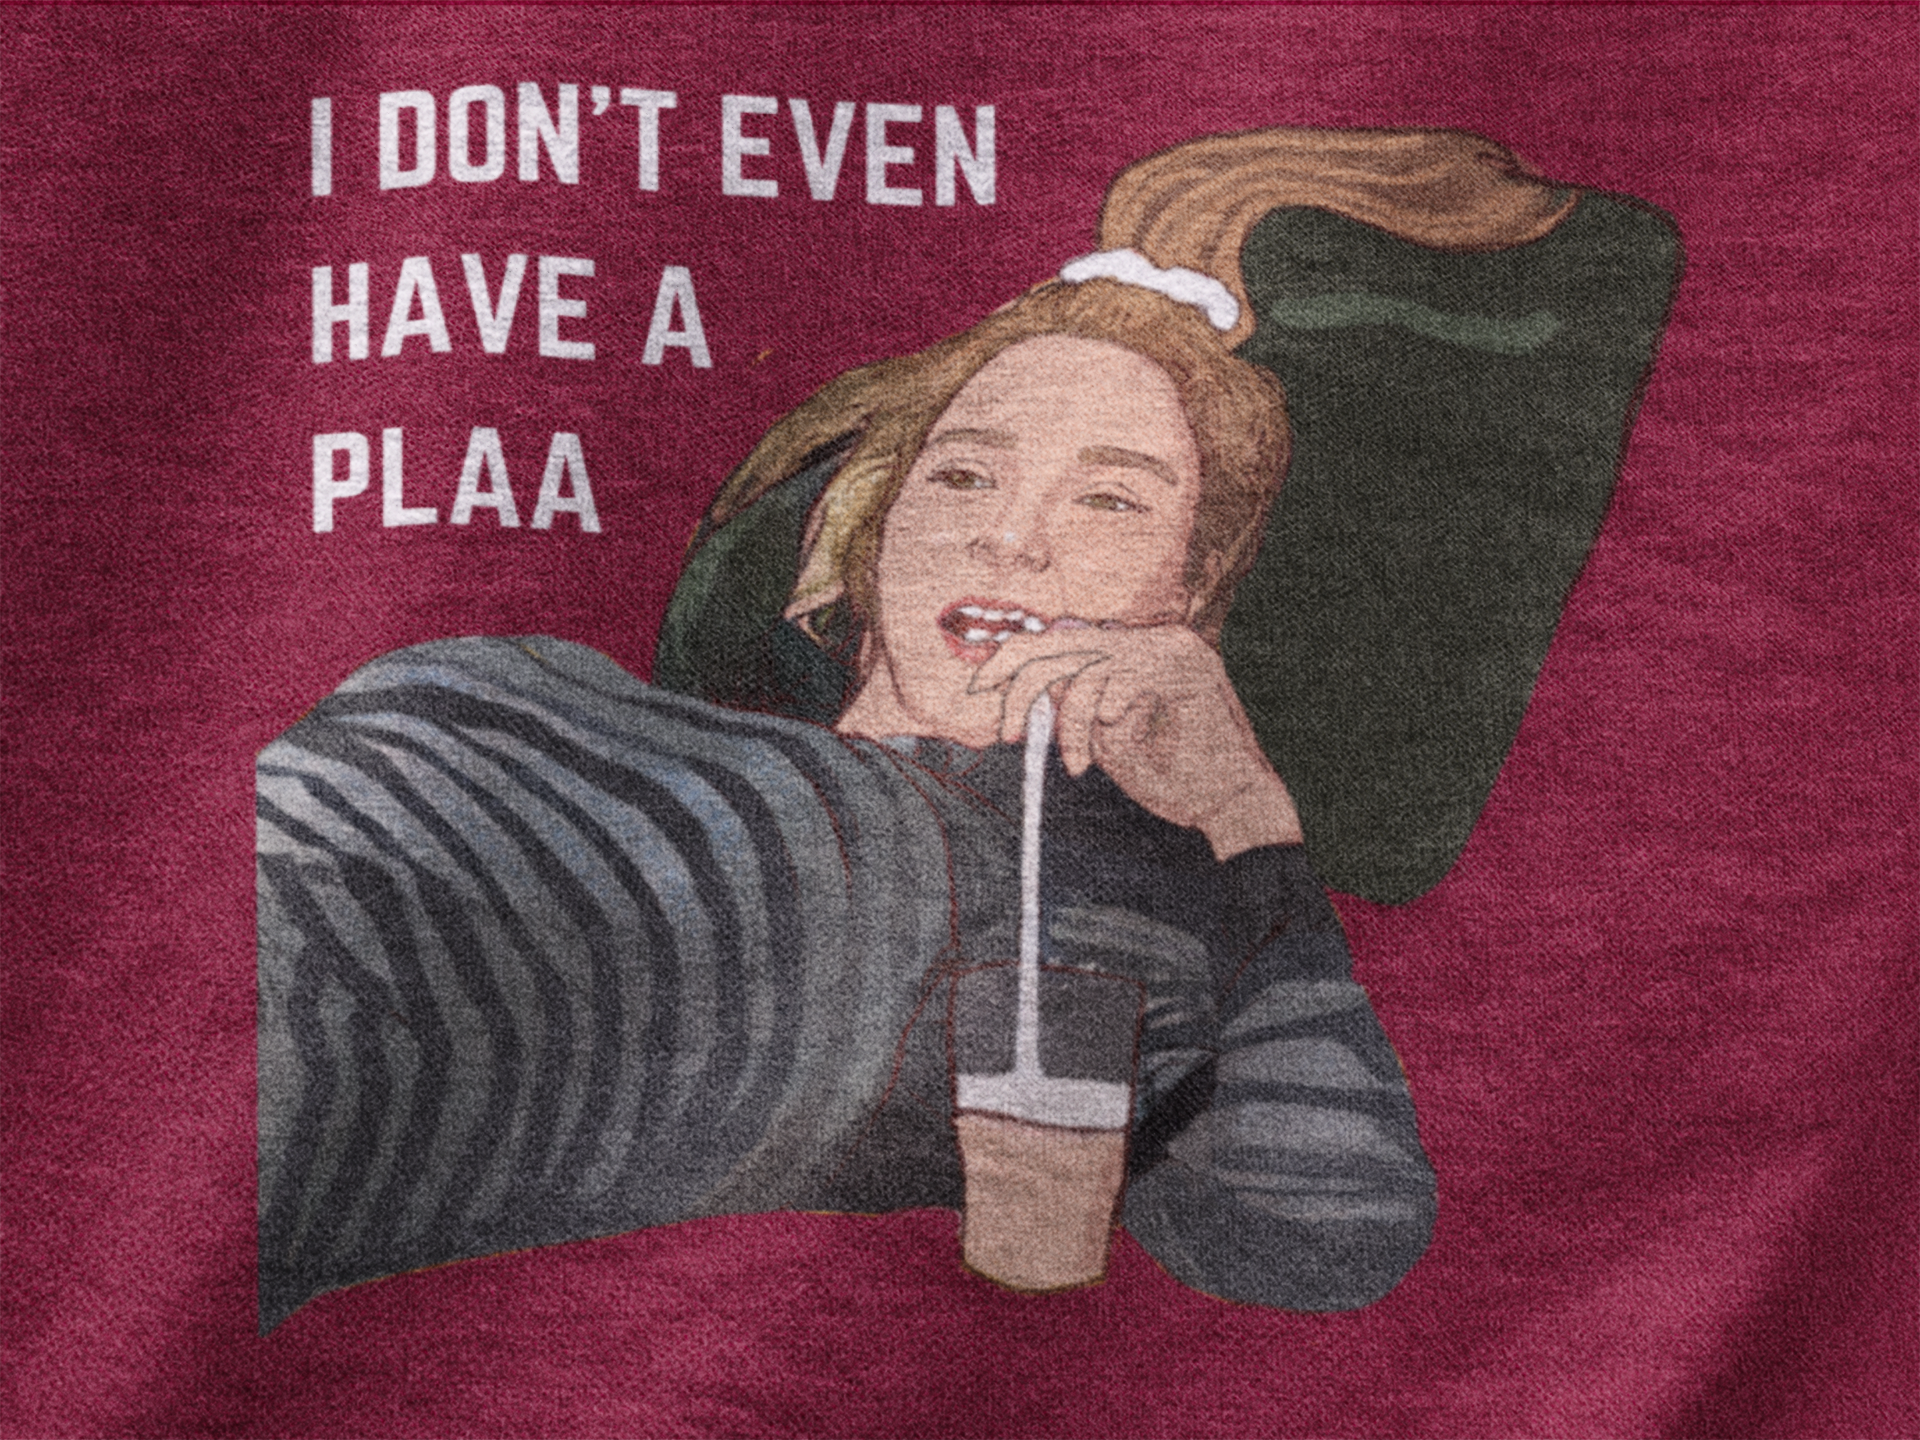 I don't have a plaaa | Premium Unisex Winter Hoodie